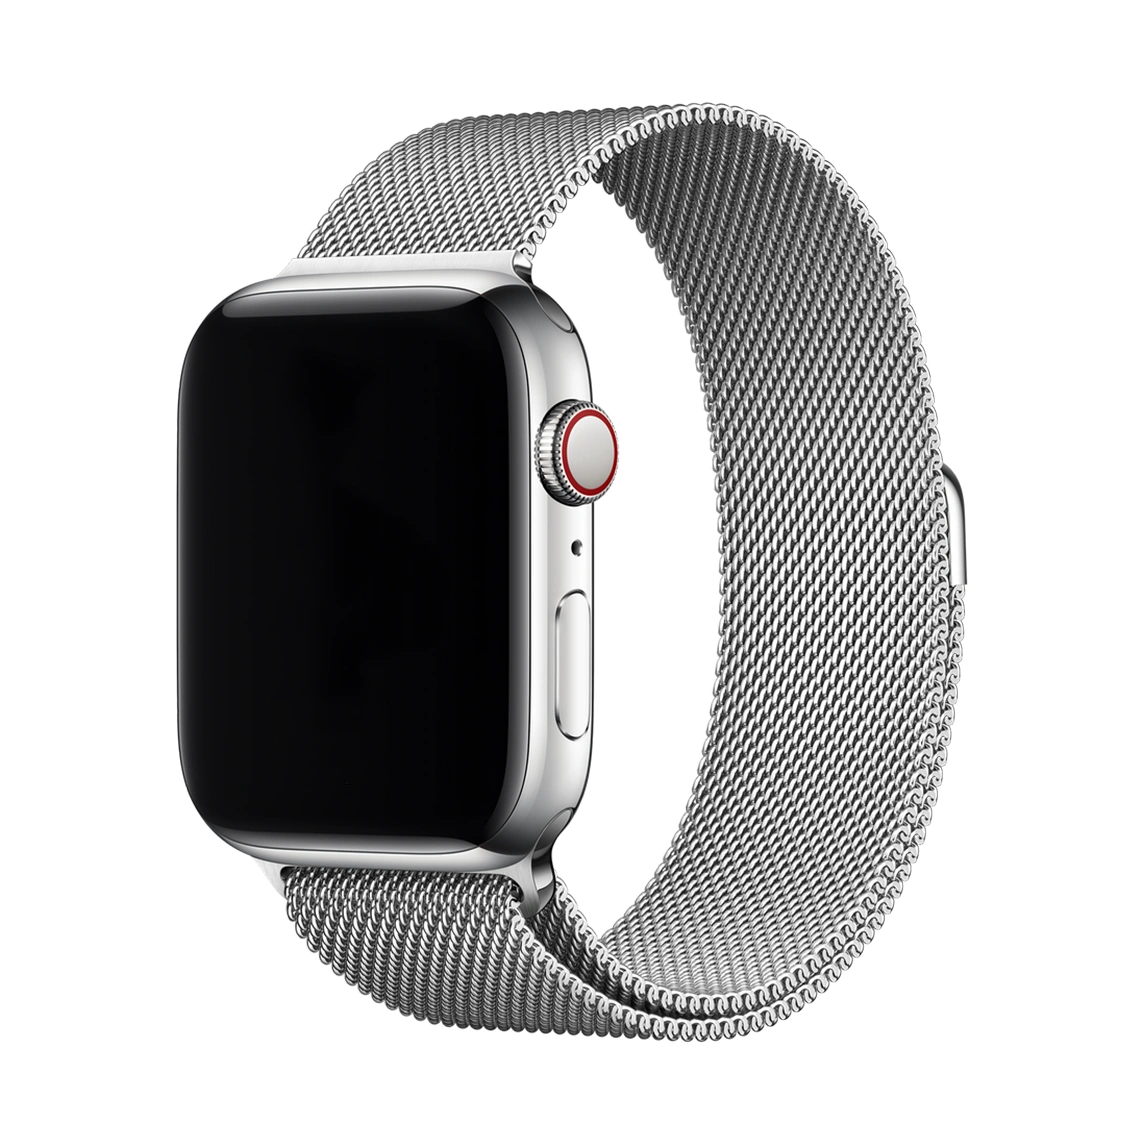 Apple Watch Series 6 Space Gray Aluminum Case with Black Sport Band